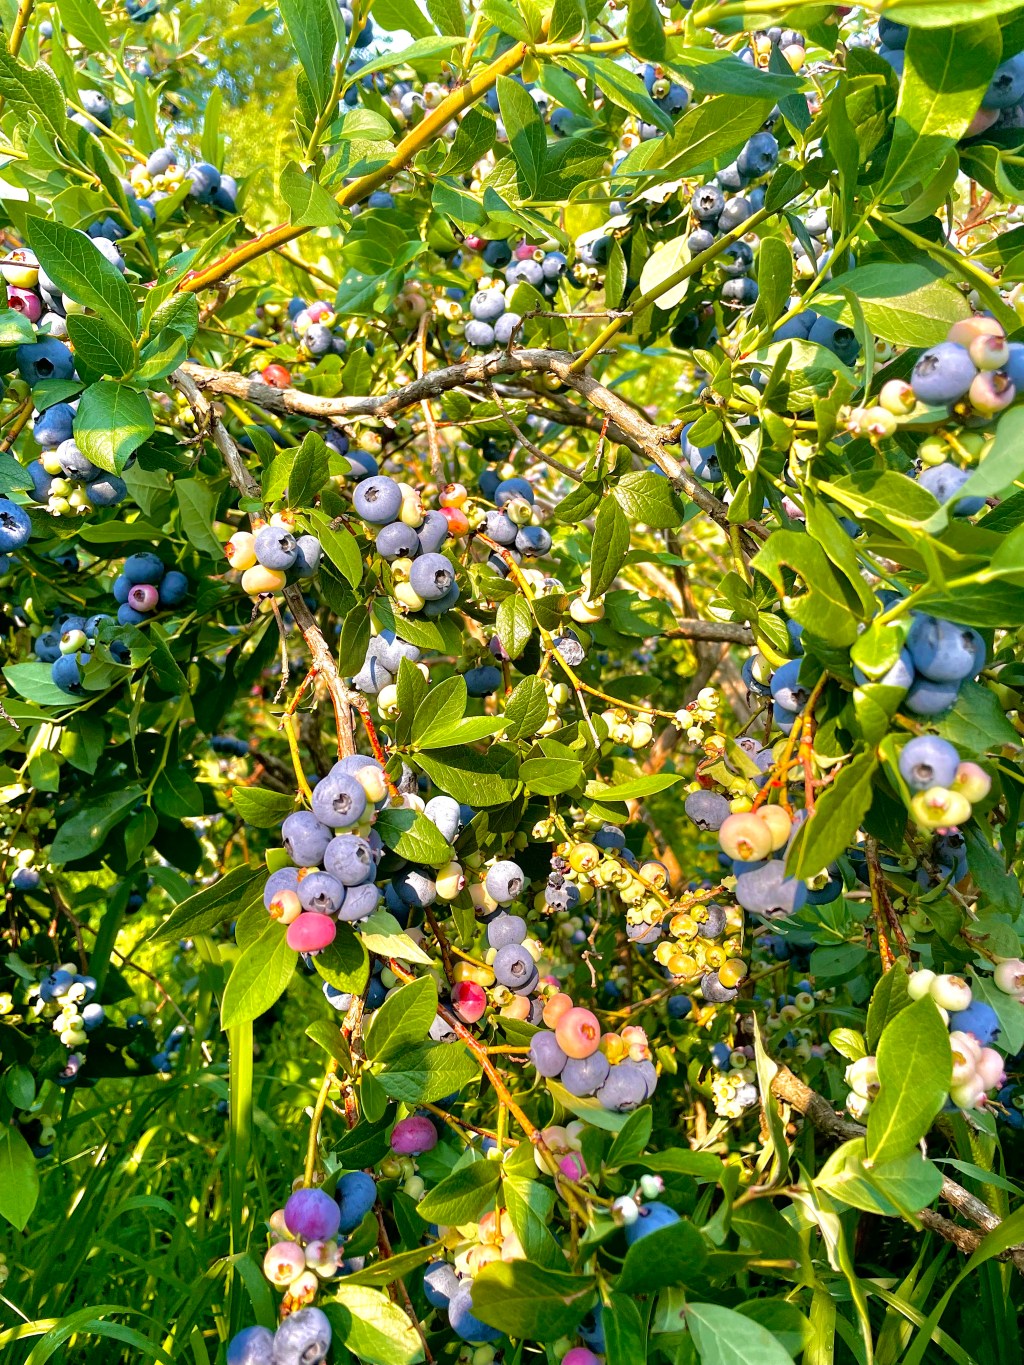 Where to go Blueberry Picking in Upstate New York